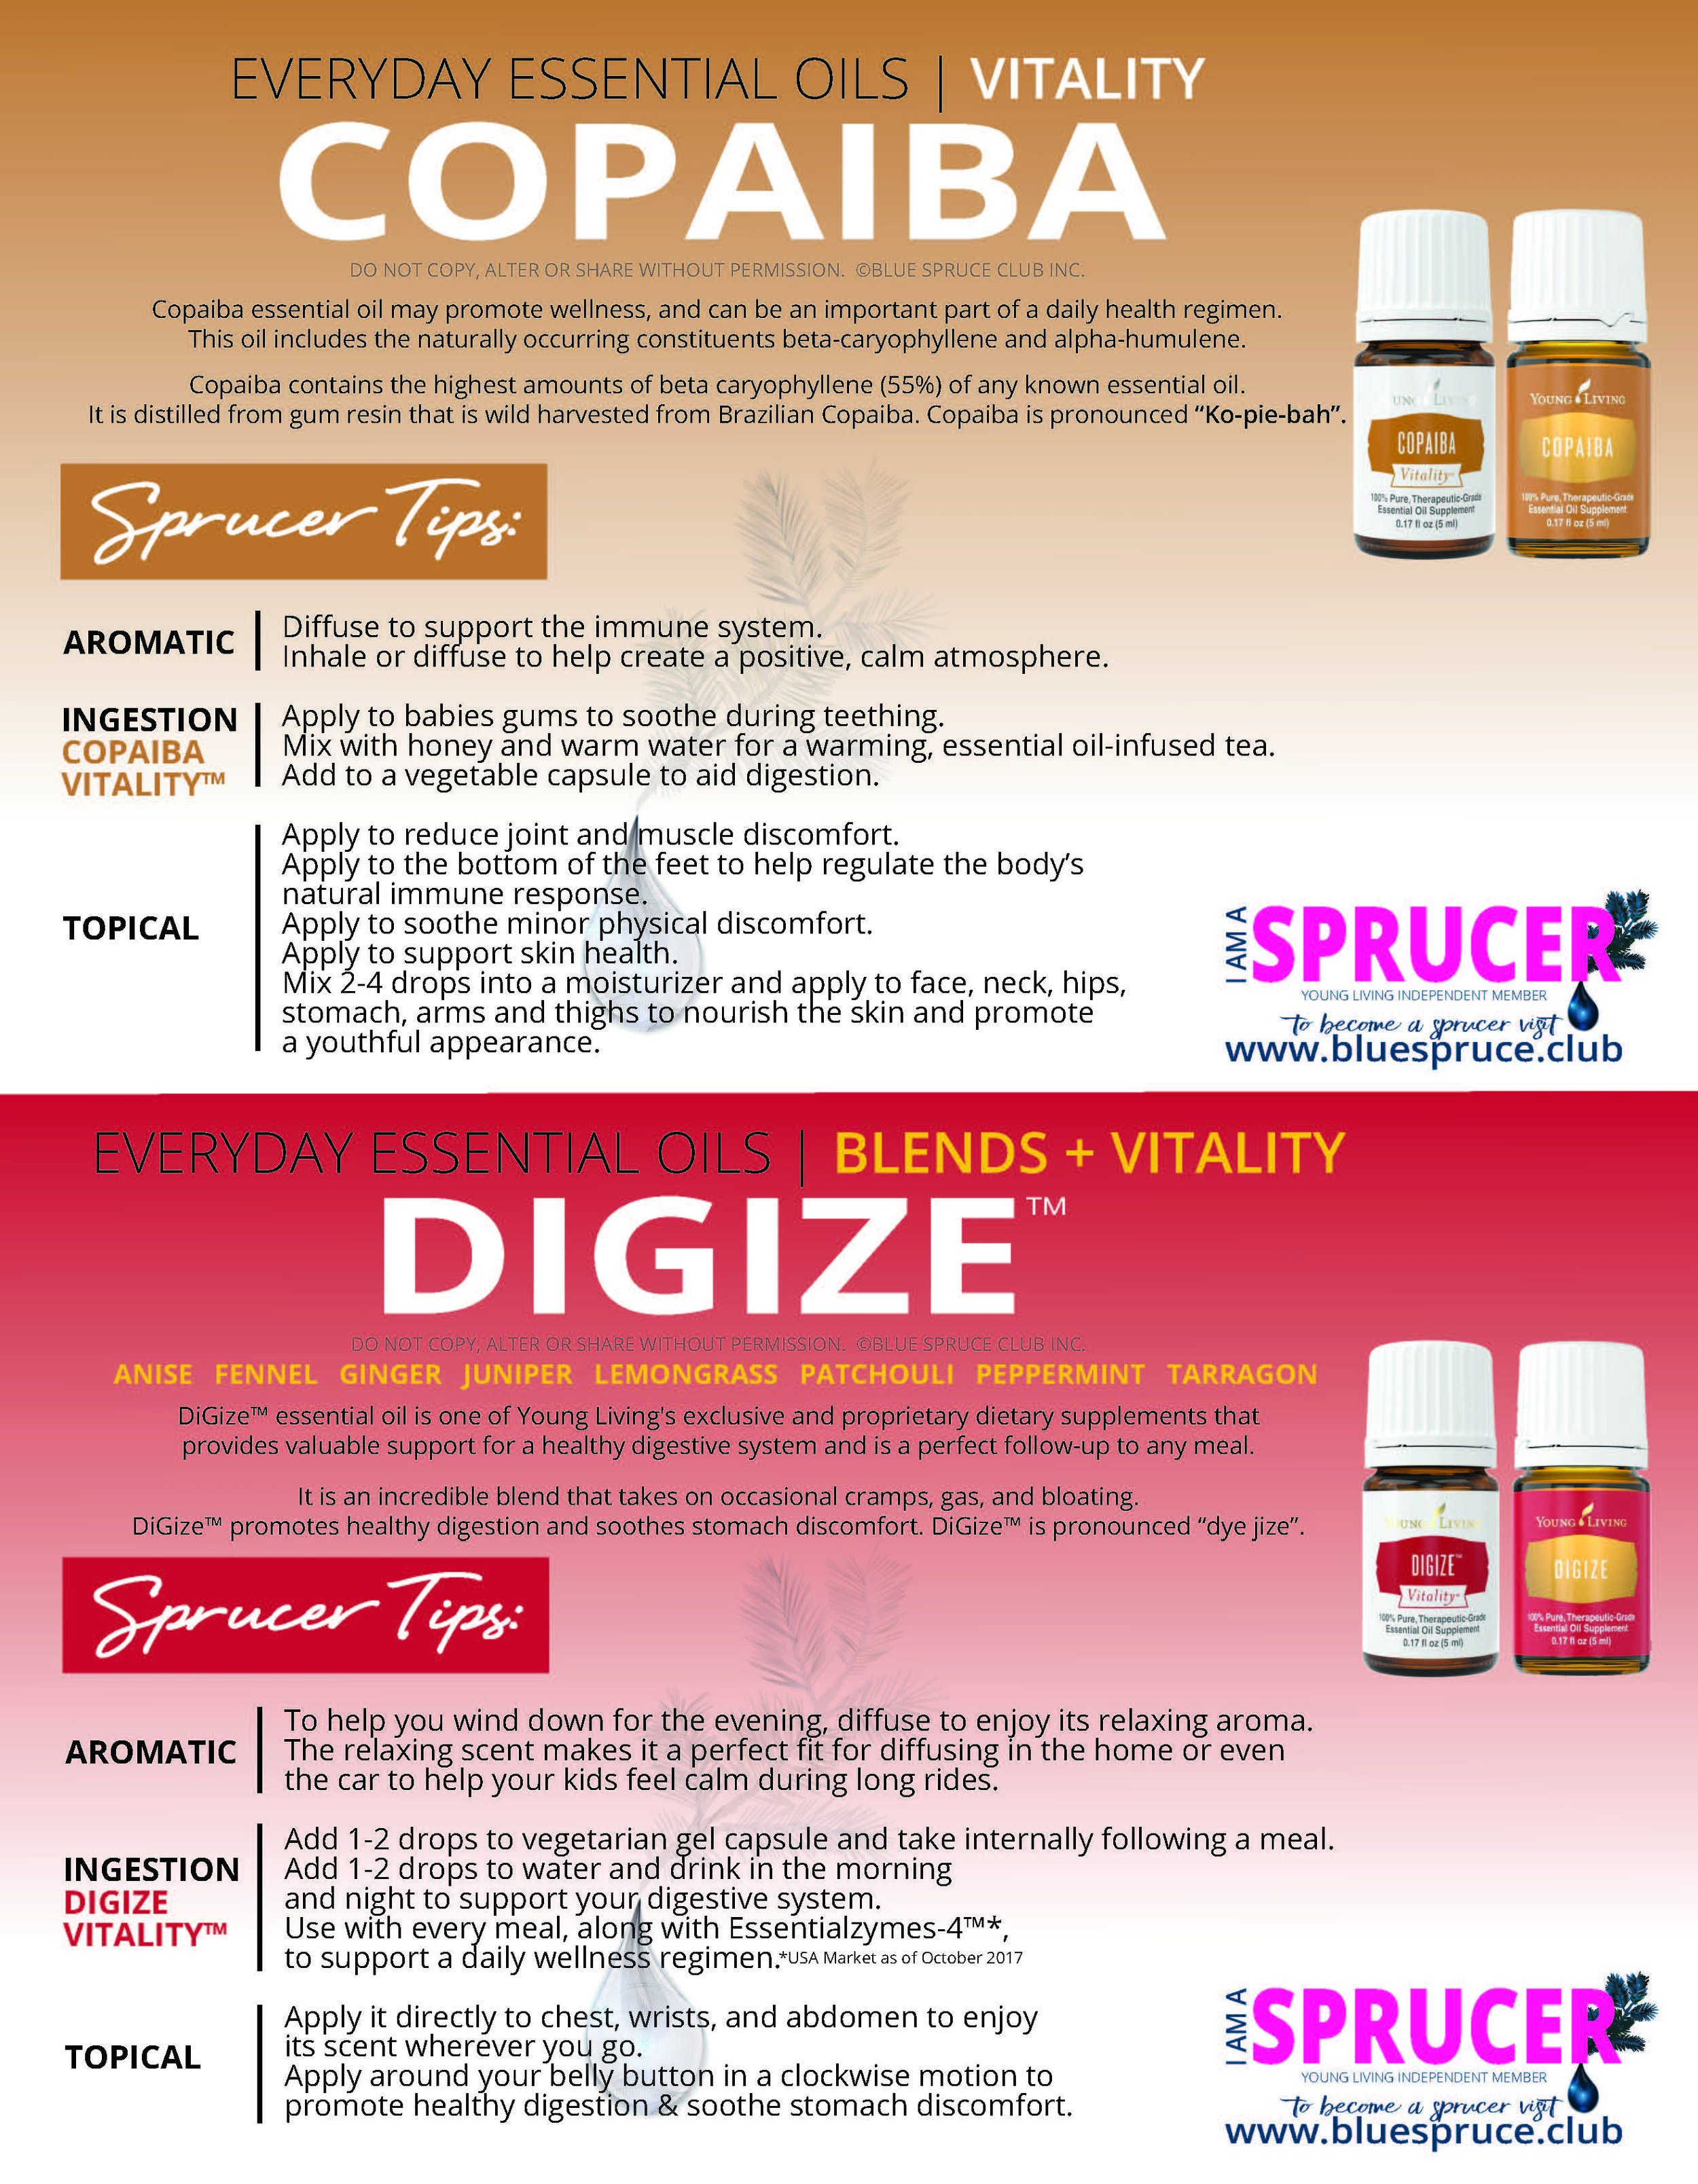 39_COPAIBA AND DIGIZE_OILS_BSC.jpg